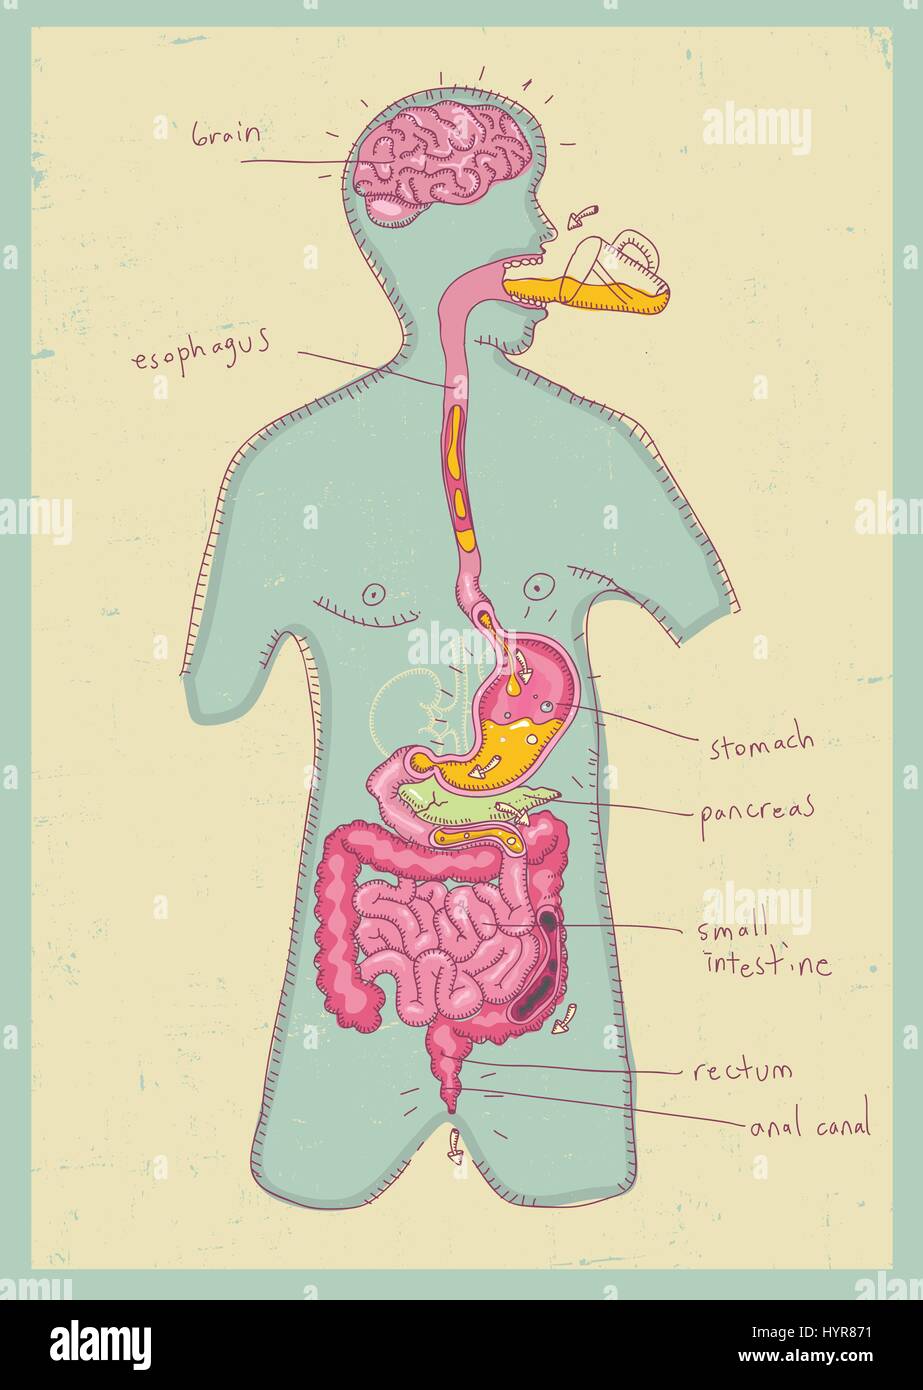 vector illustration of human digestive system for kids Stock Vector